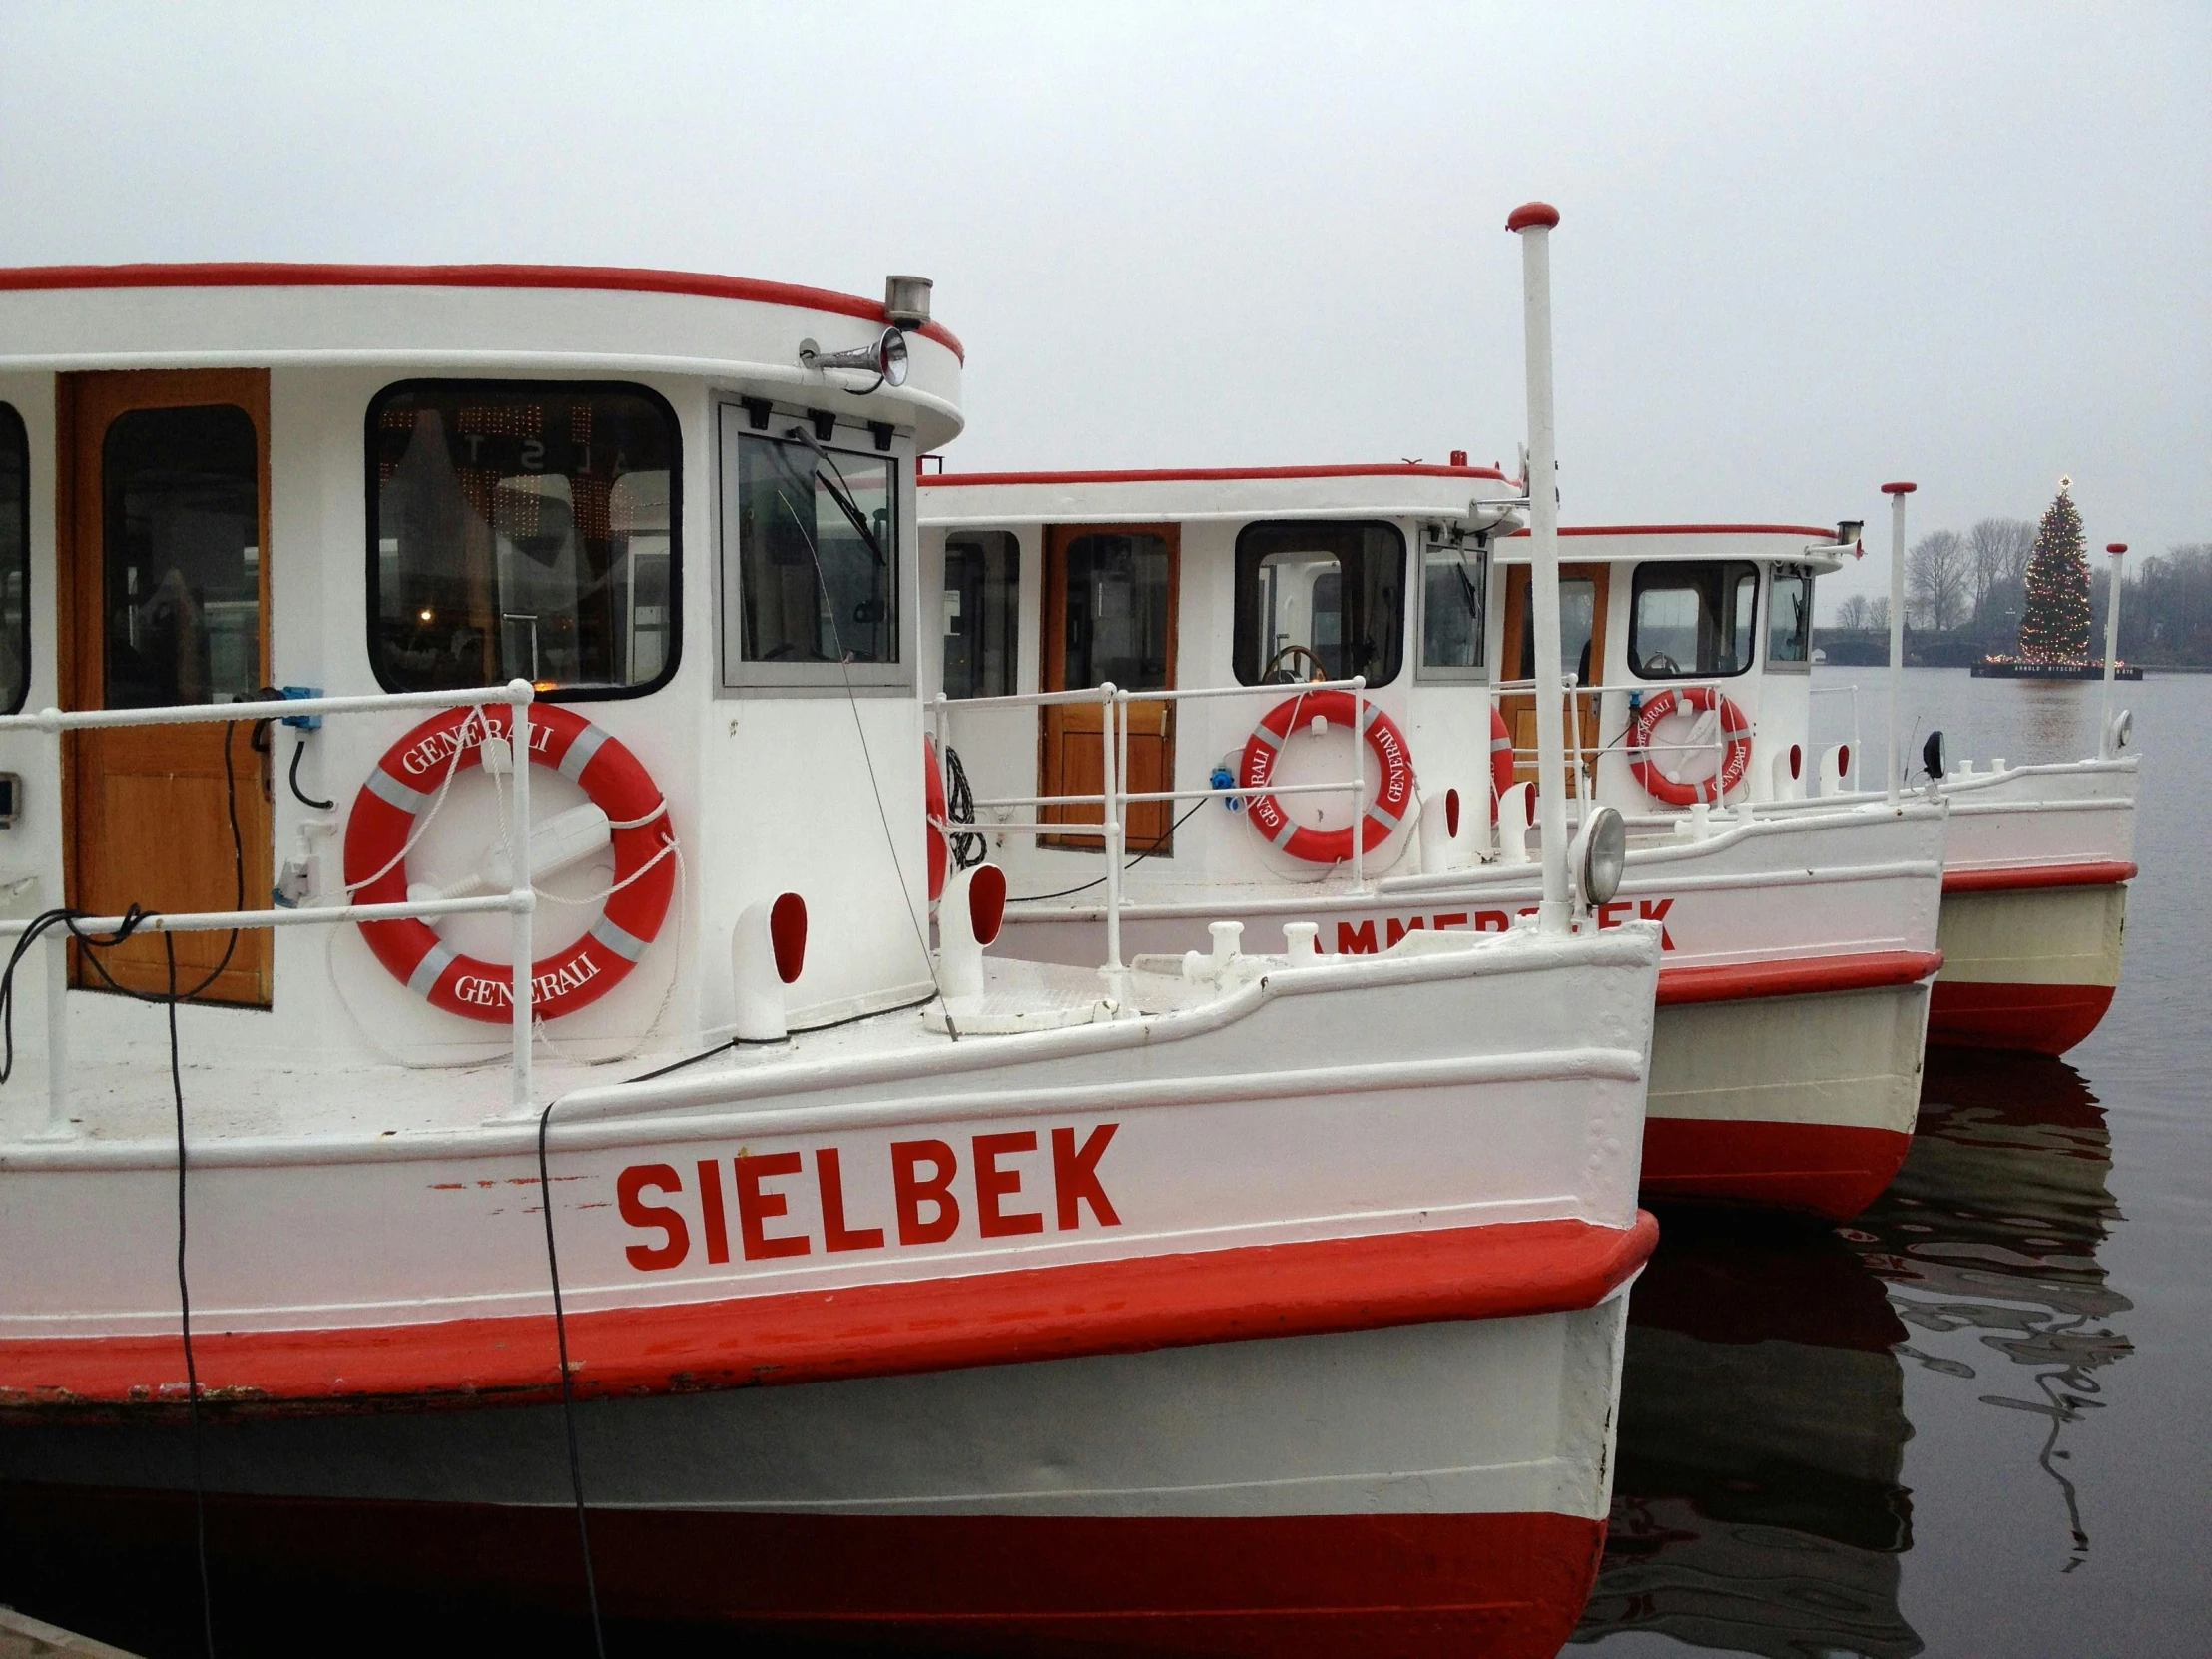 a couple of boats that are sitting in the water, red and white, berkerk, with names, exterior photo